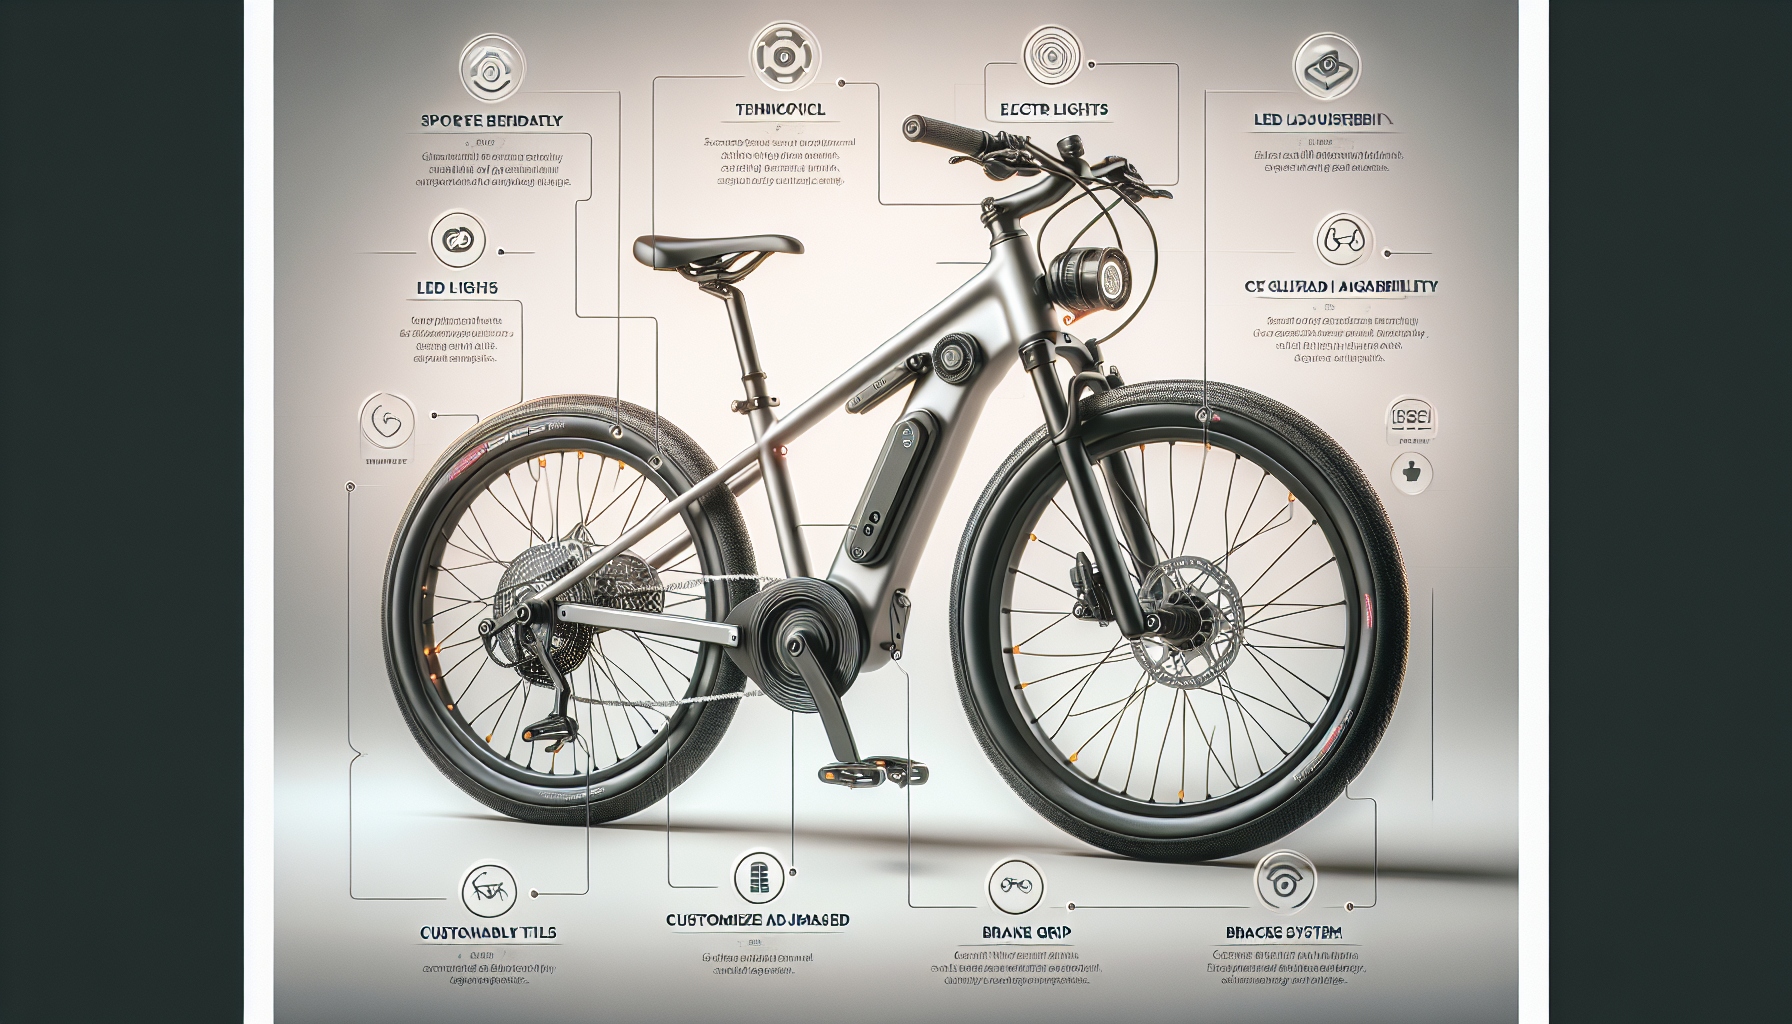 What Are The Key Features Of Speedrid Electric Bike?